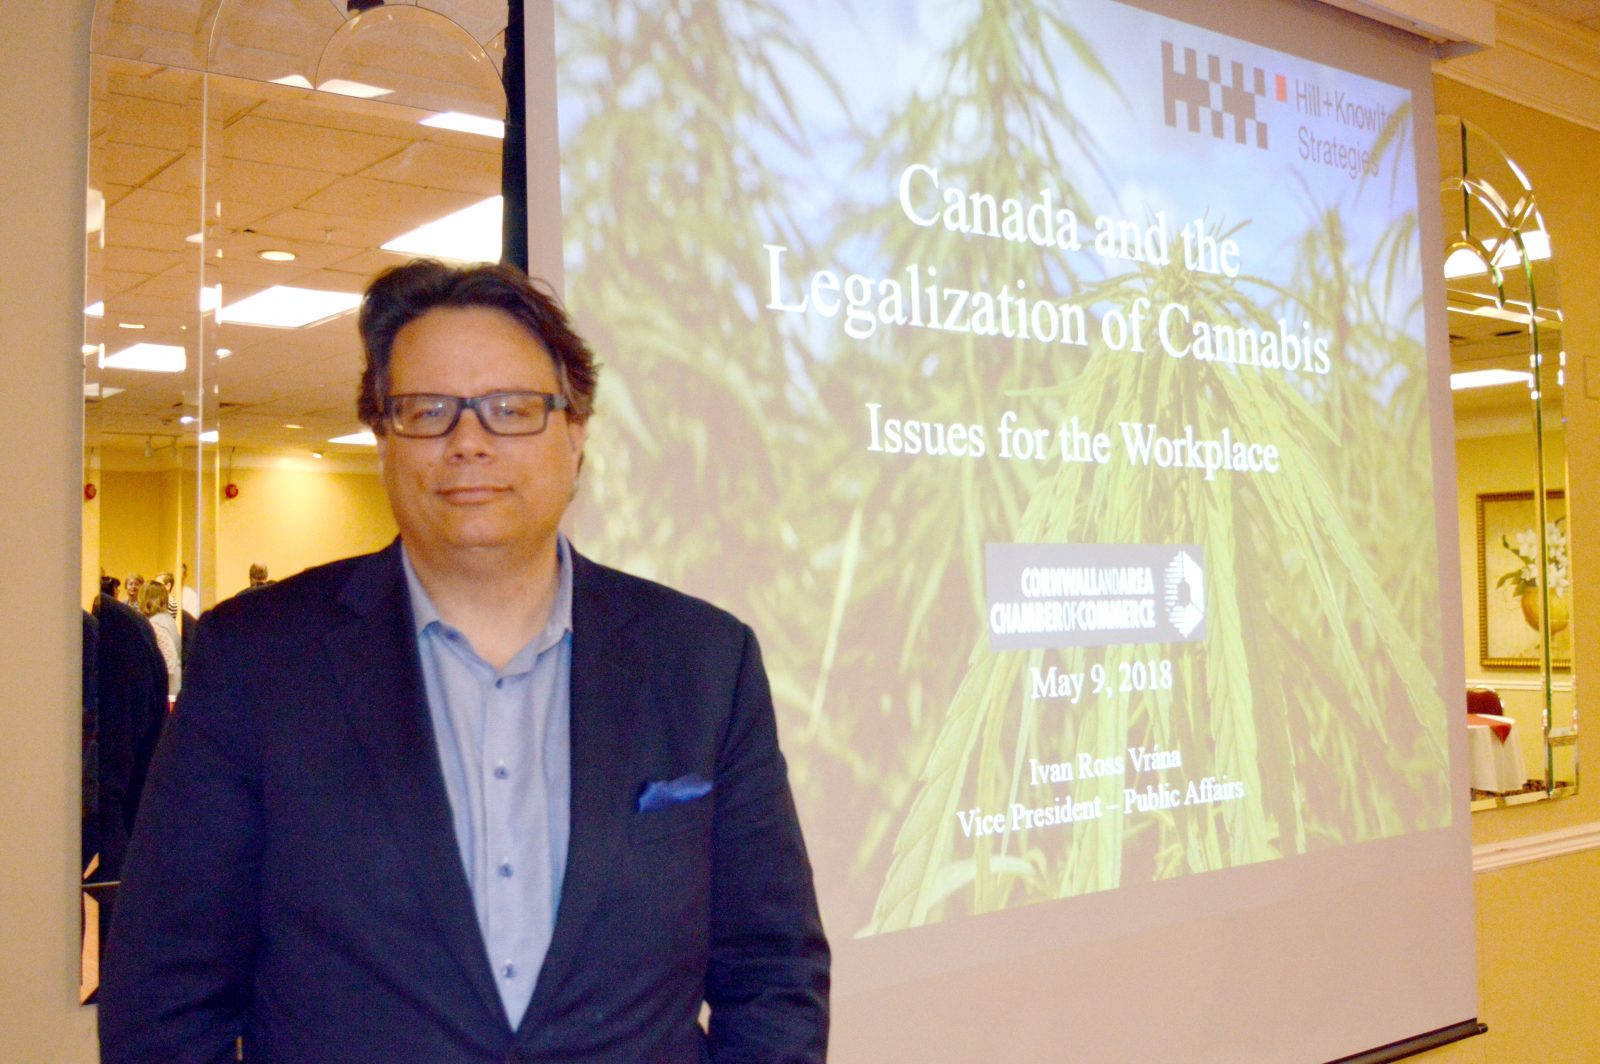 Chamber held weed workplace workshop